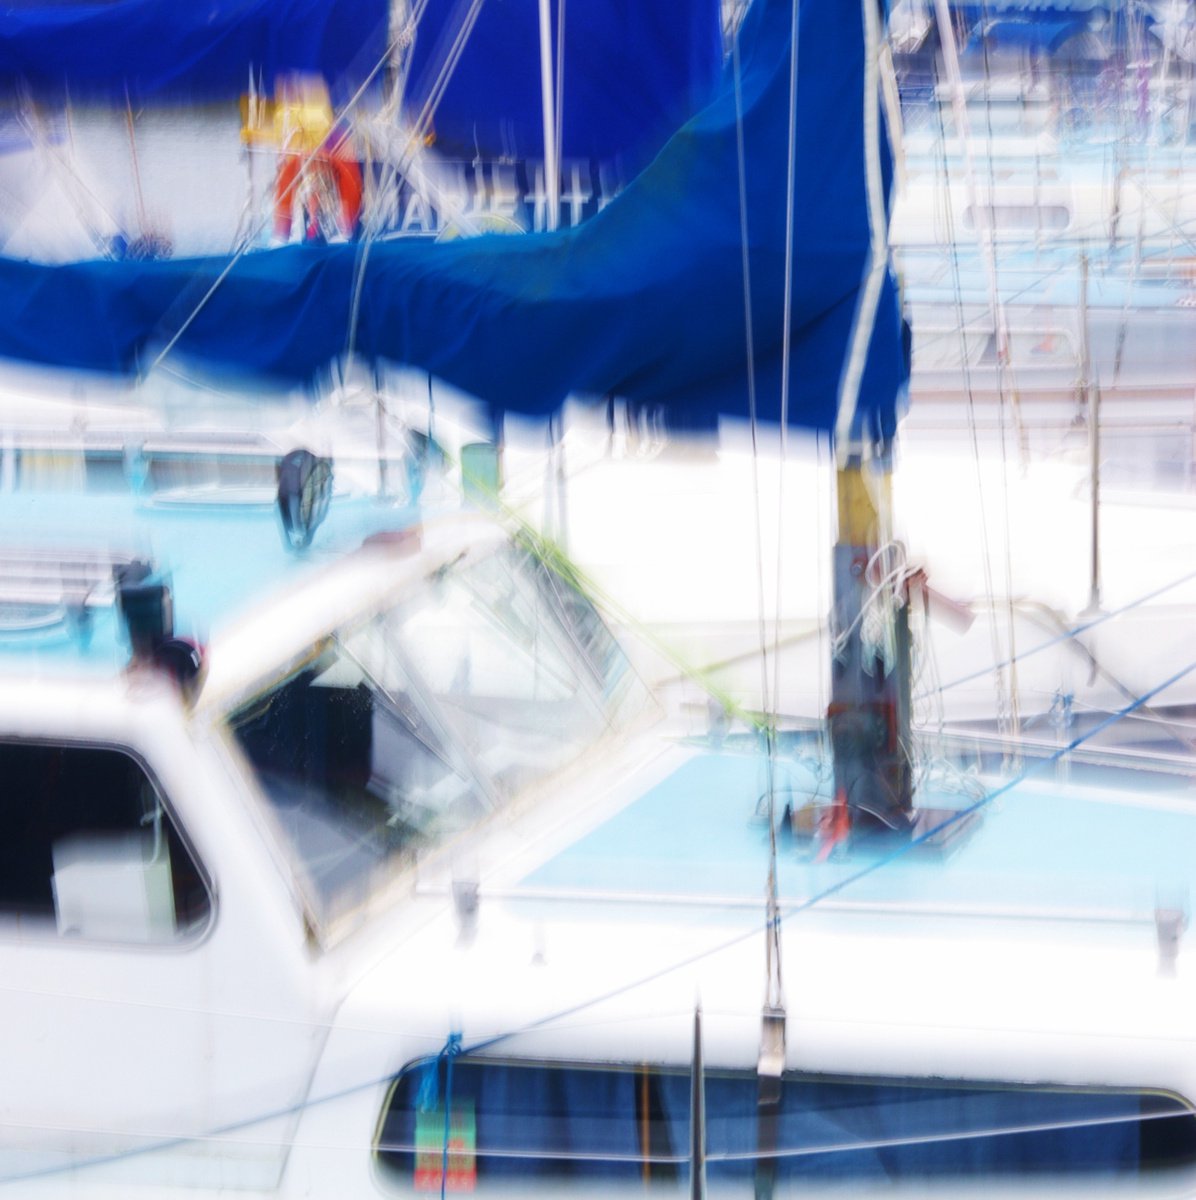 Blue Sail, impressionist abstract sailing boats by oconnart